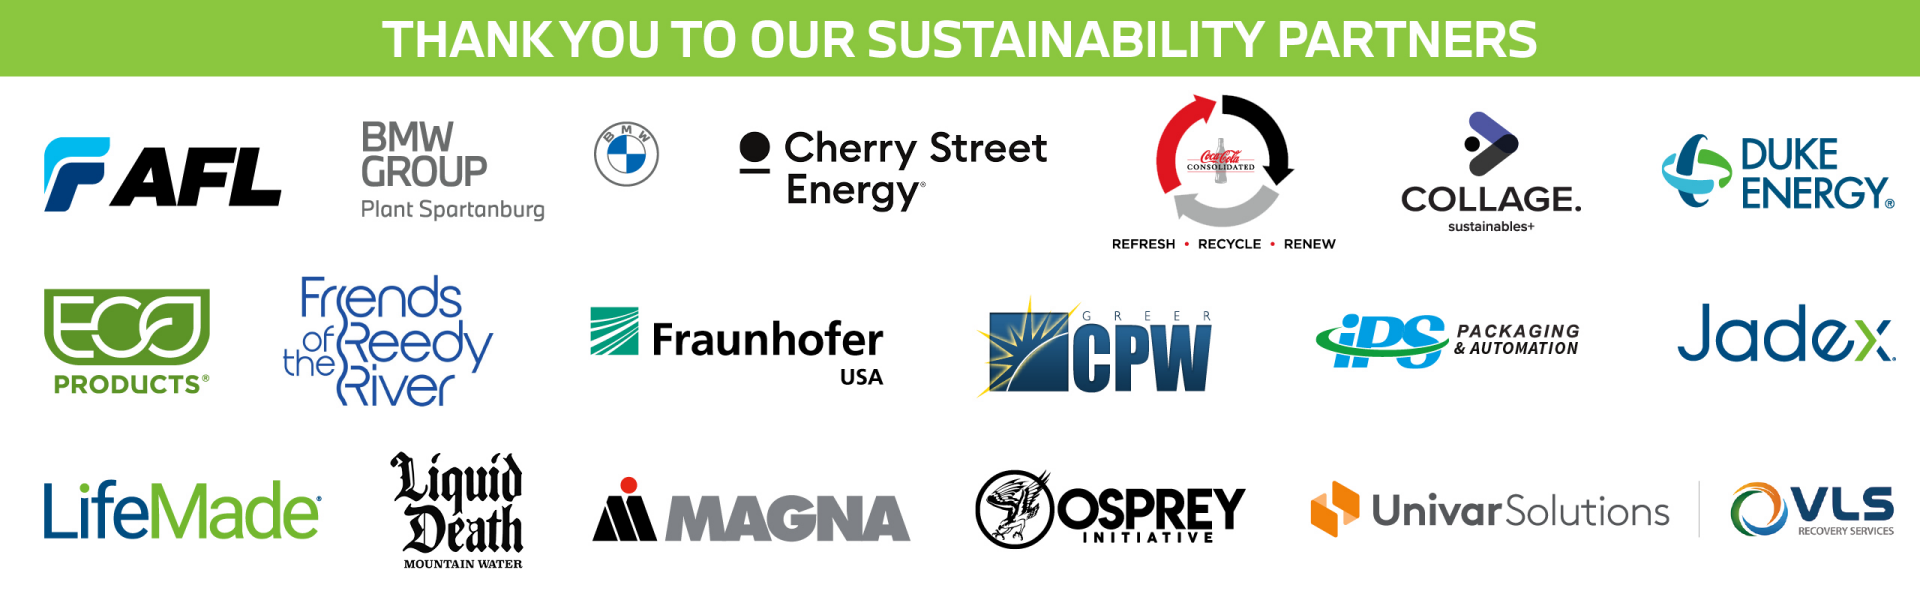 Thank you to our sustainability sponsors:  AVL Univar Solutions, Iac, Keep ONespartanburg beautiful, rabble wine, co, Millien, Litter Ends Here, Keep Greenville County Beautiful, MOA Architecture, BMW Manufacturing, Furman University, She institute for Sustainable Communities, Ball Companies, Atlantic Packaging